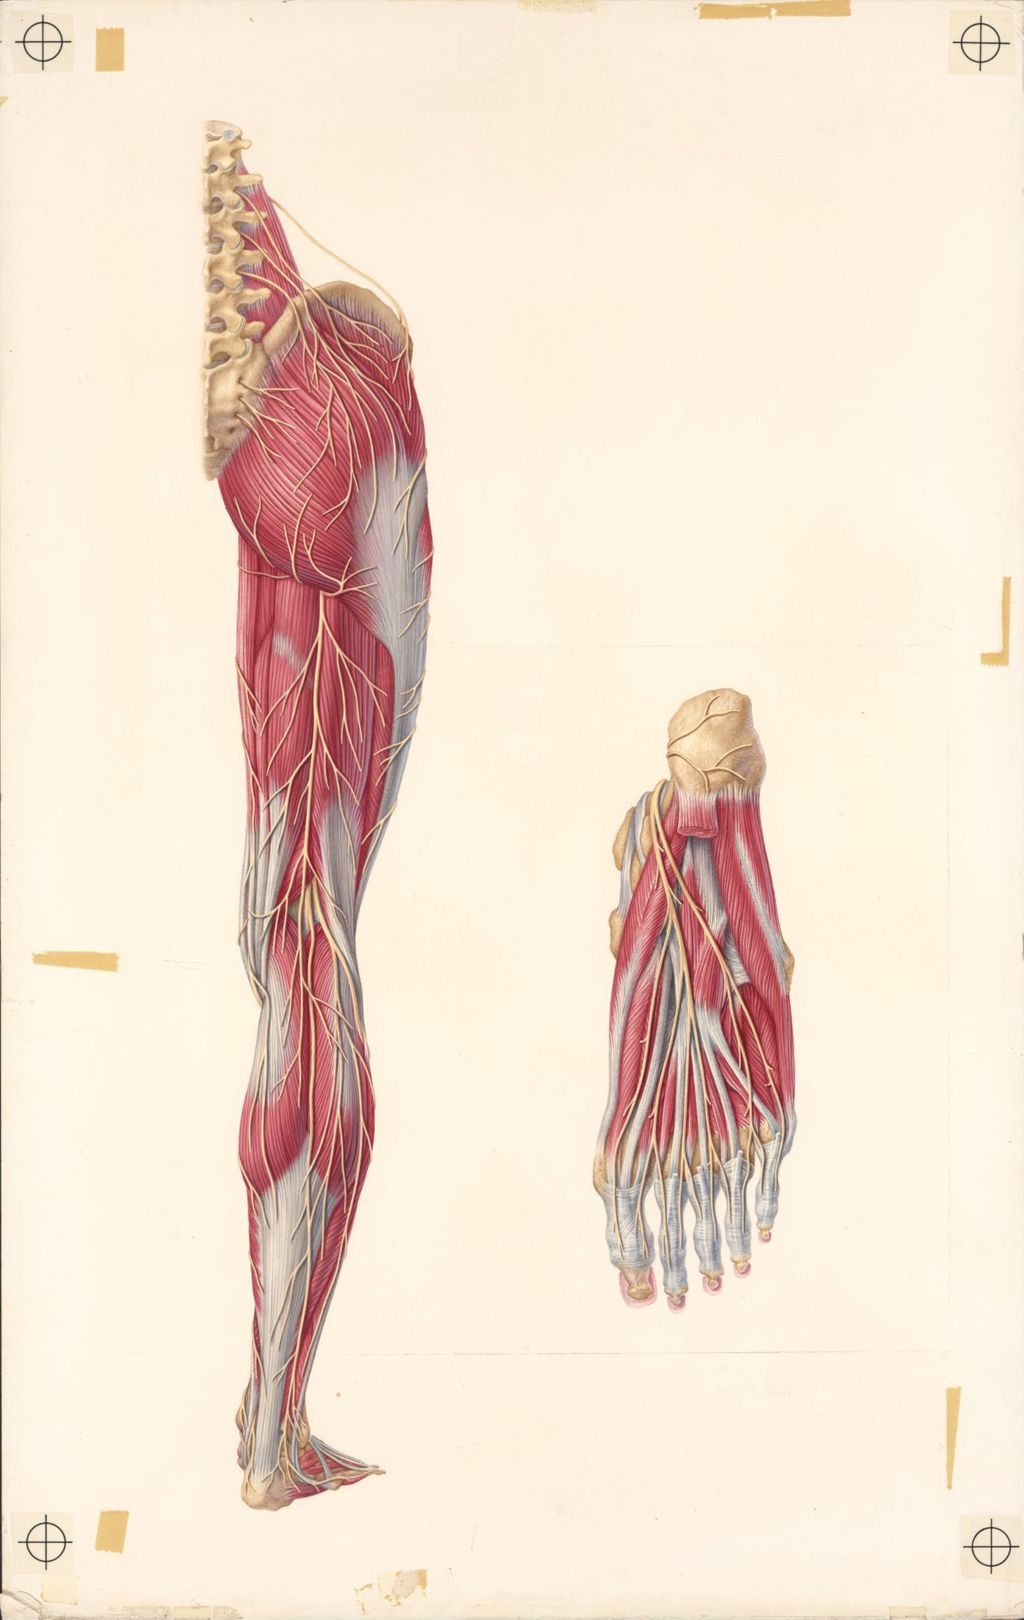 Doctor-Patient Explanatory Atlas of Anatomy, The Cutaneous Nerves of the lower limb superimposed on the musculature, Plate II